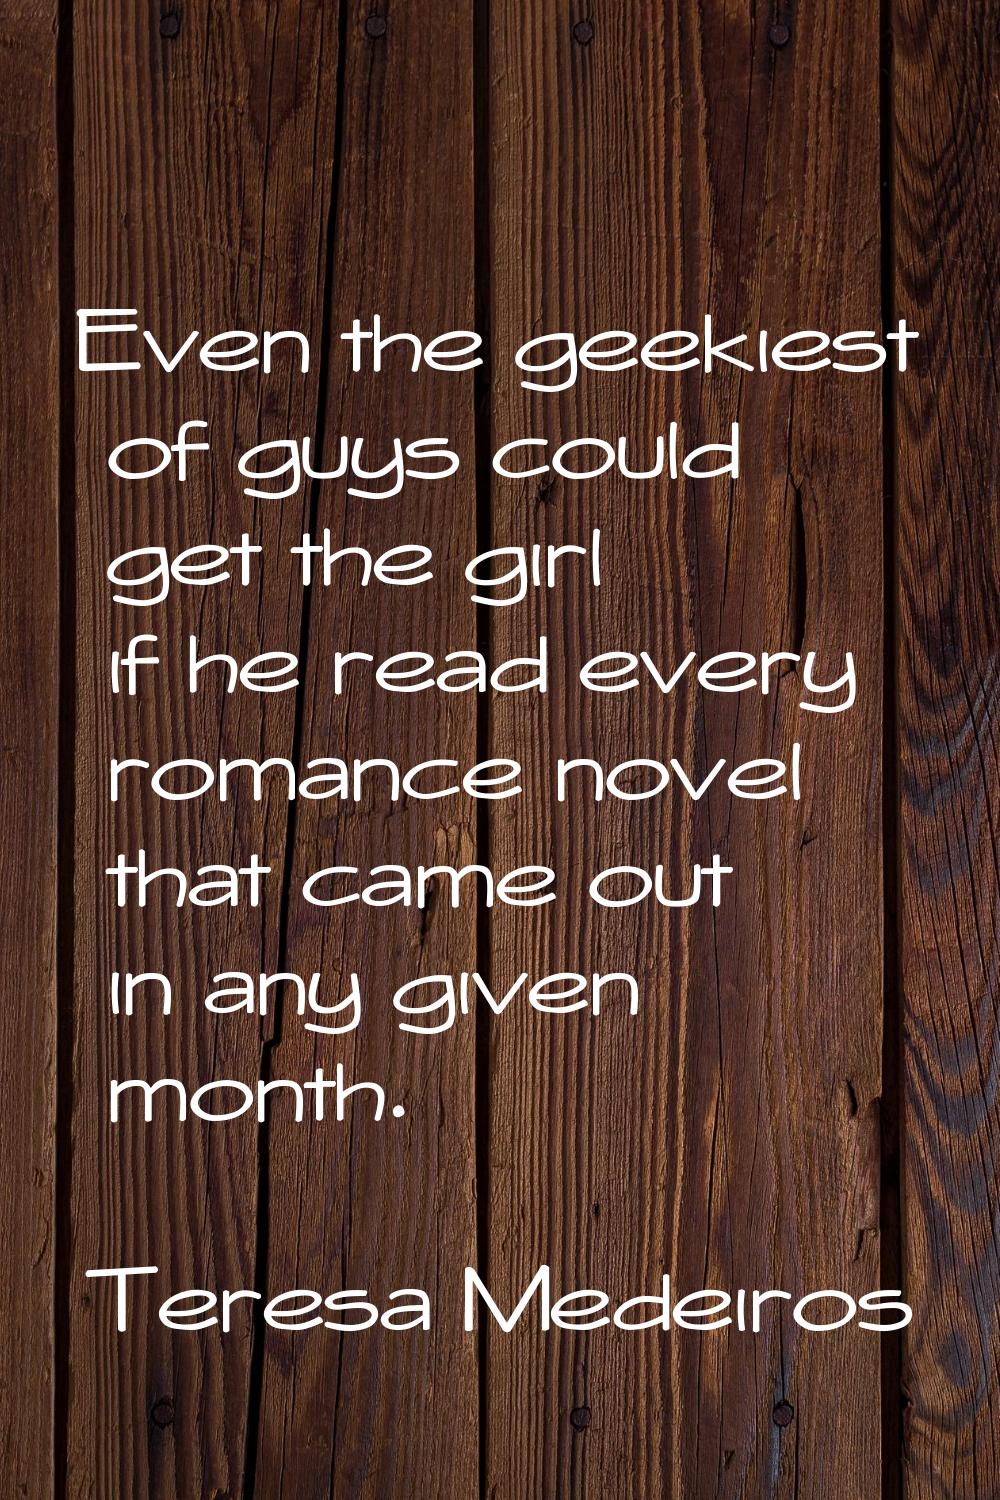 Even the geekiest of guys could get the girl if he read every romance novel that came out in any gi